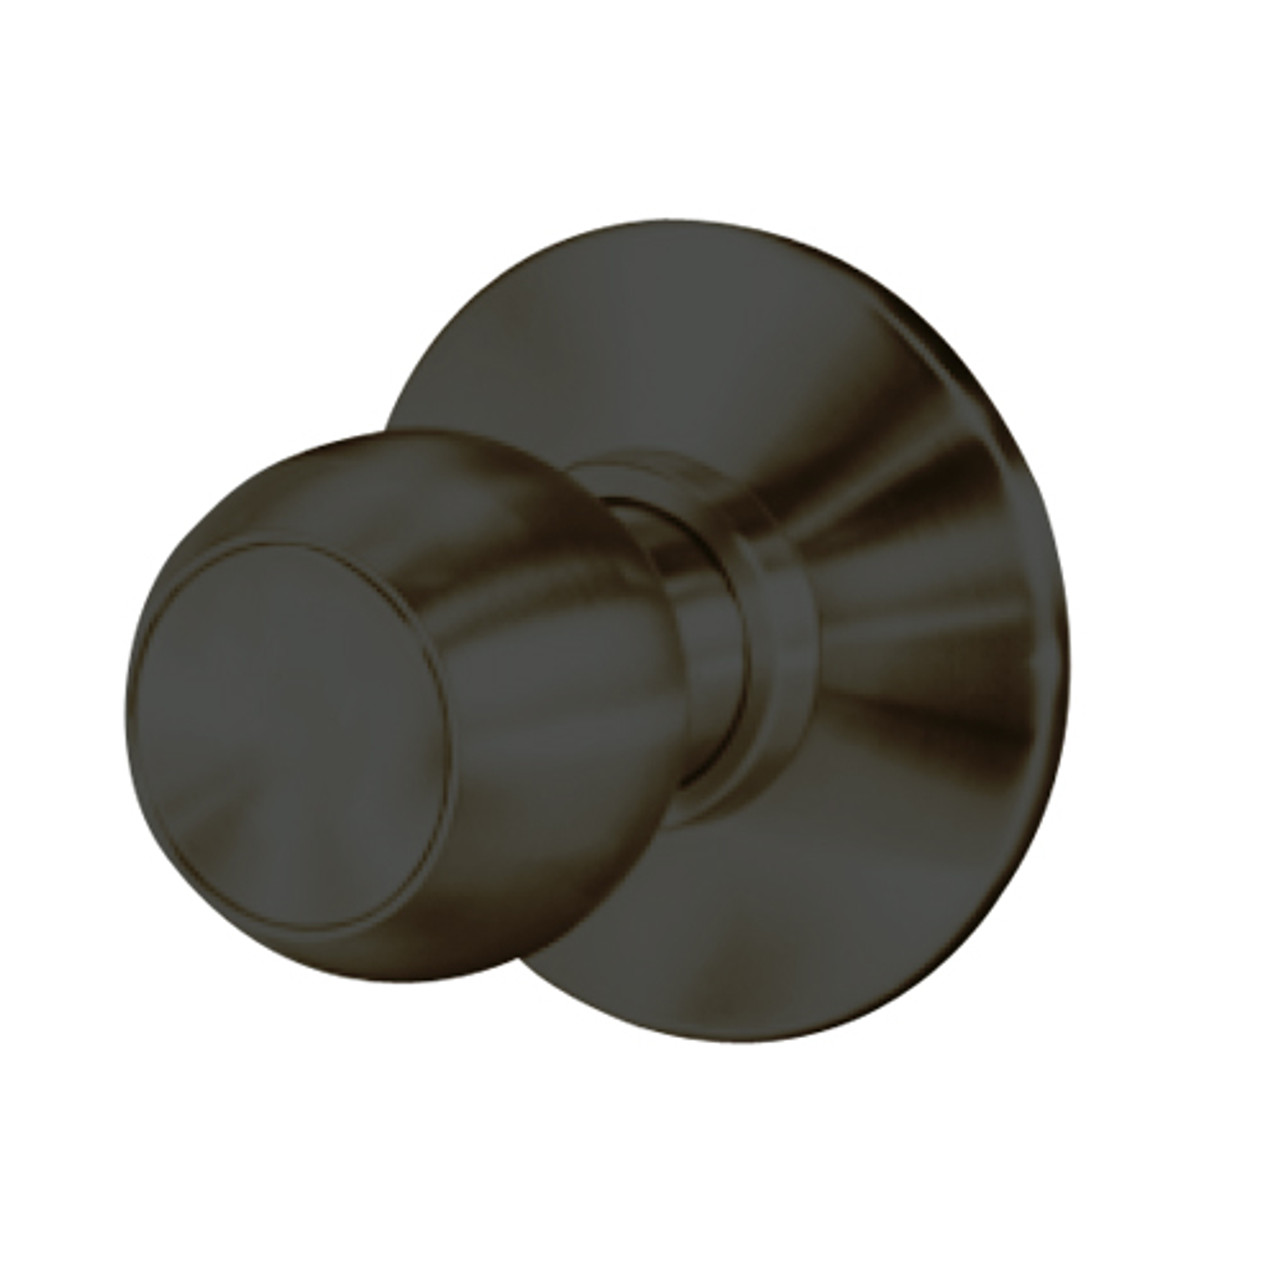 8K30M4DS3613 Best 8K Series Communicating Heavy Duty Cylindrical Knob Locks with Round Style in Oil Rubbed Bronze